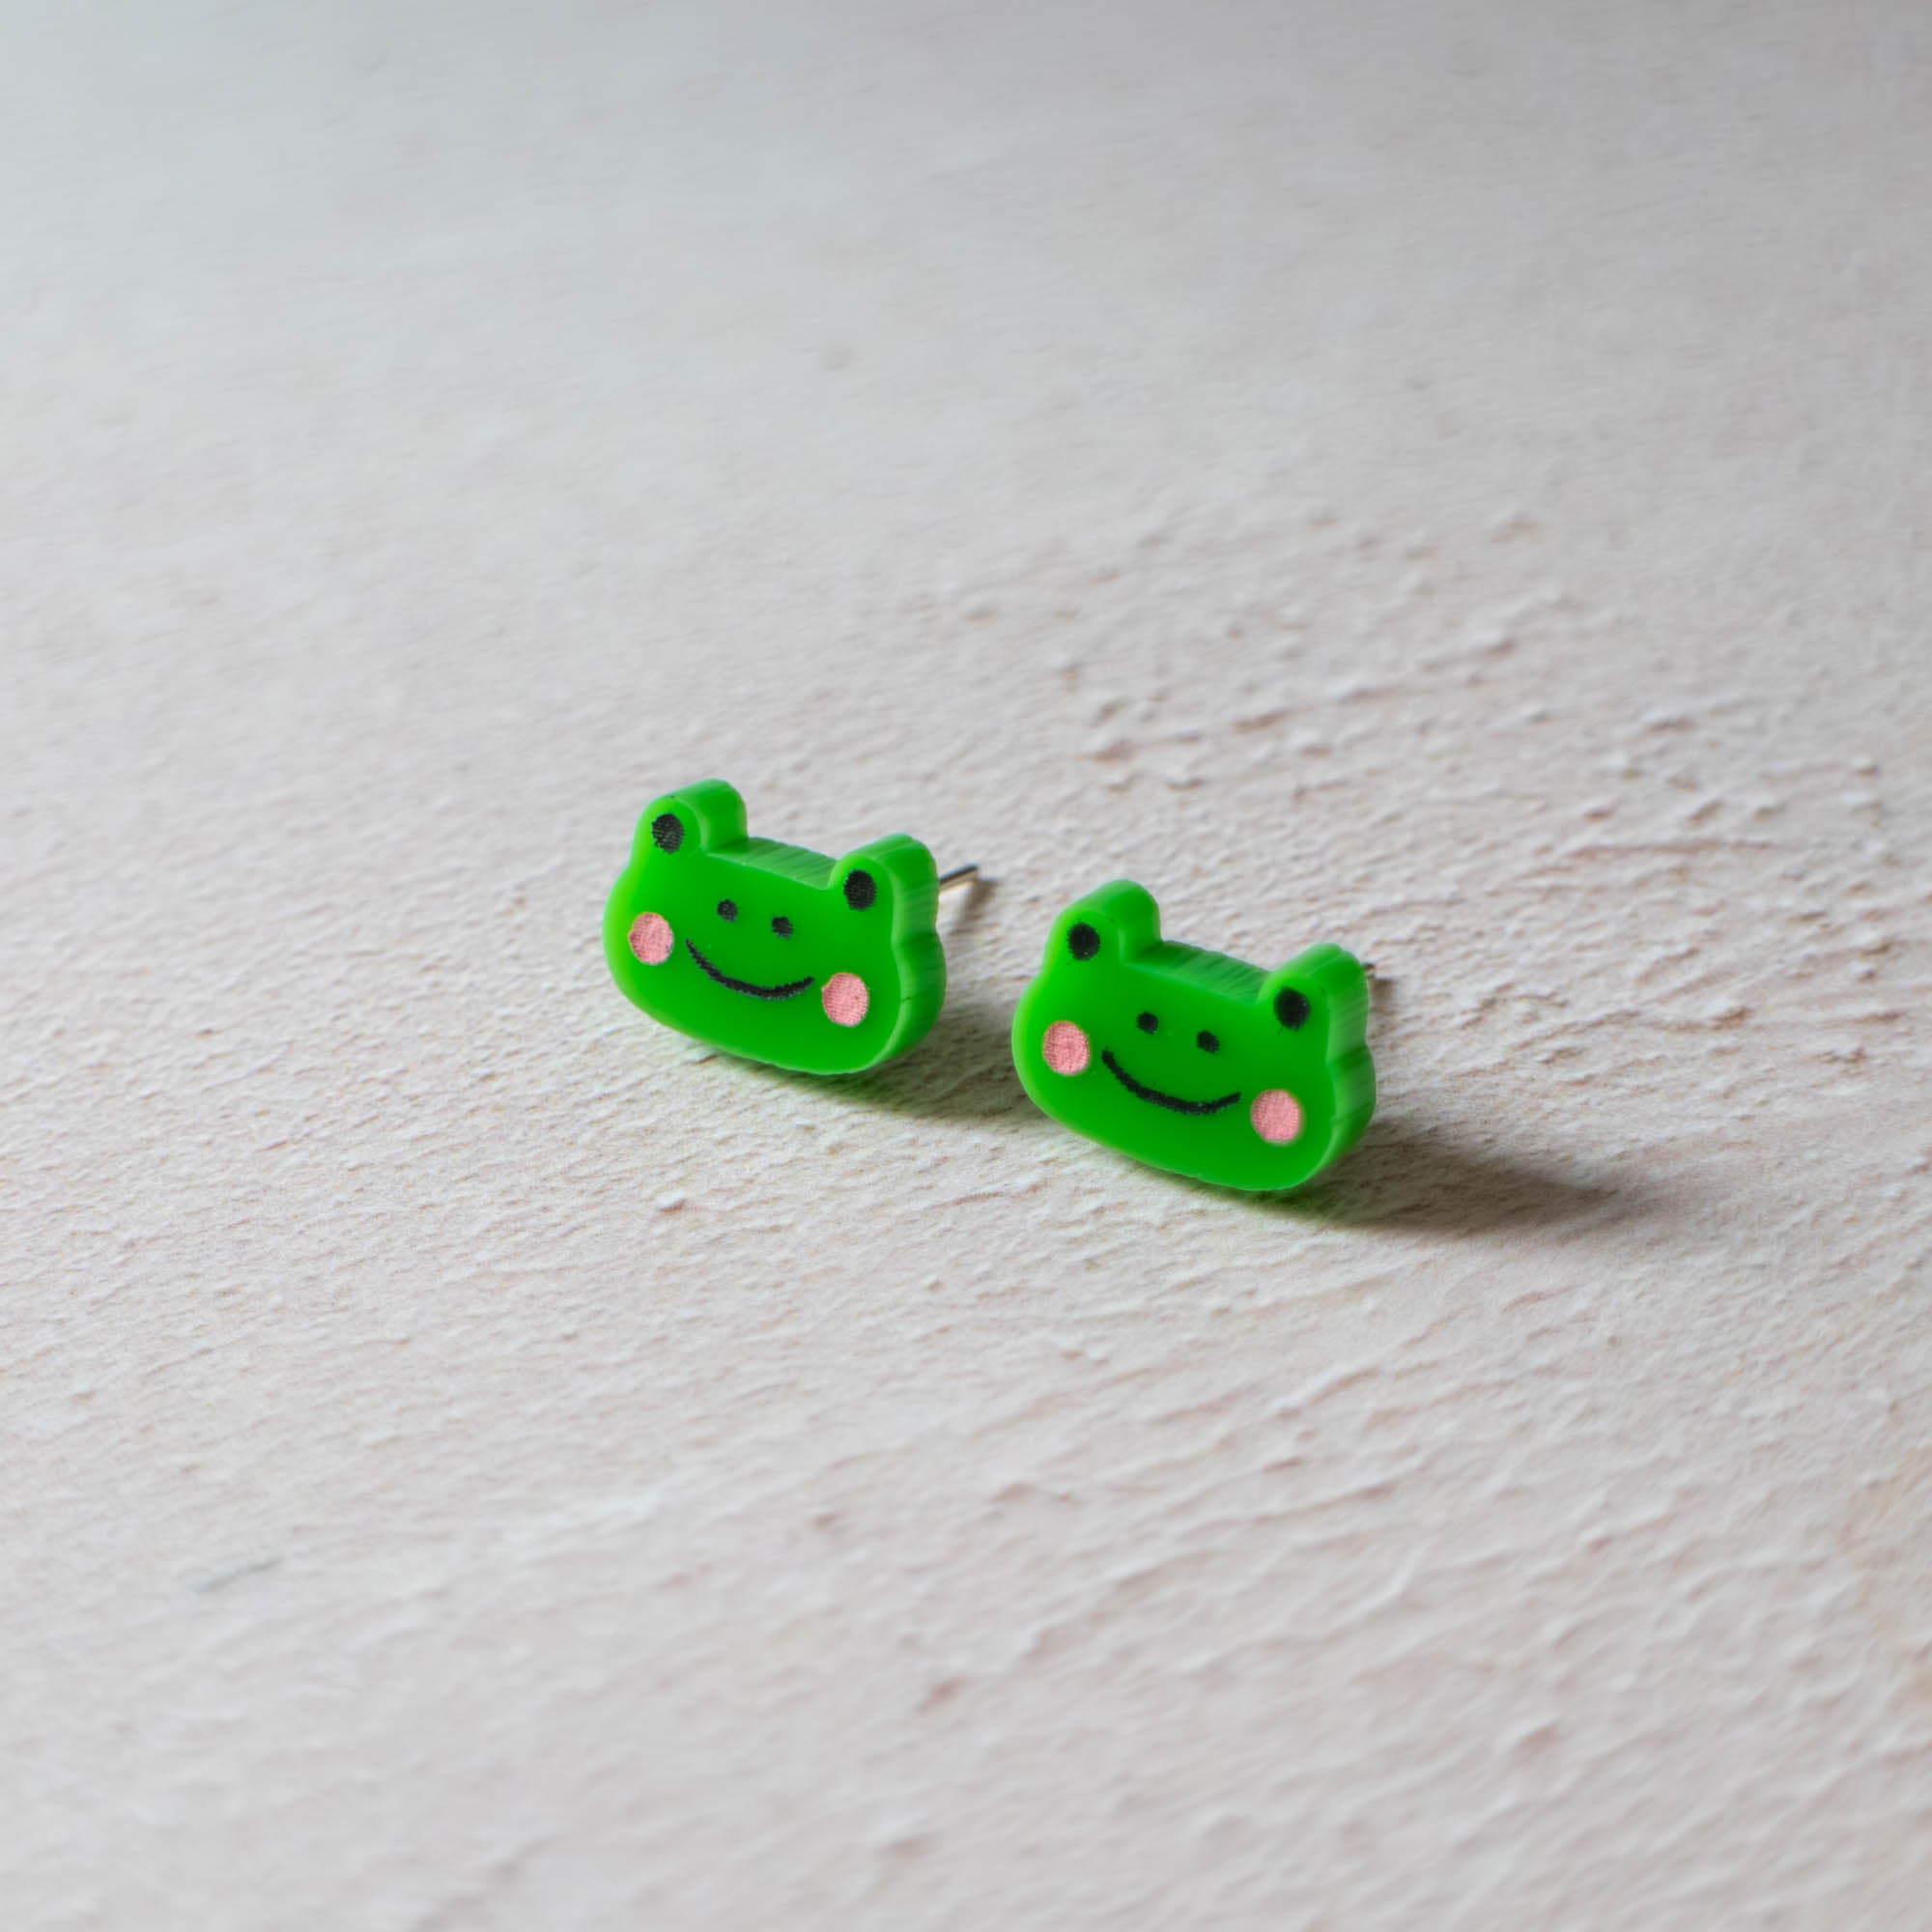 Frog earrings with smiley face by Finest Imaginary